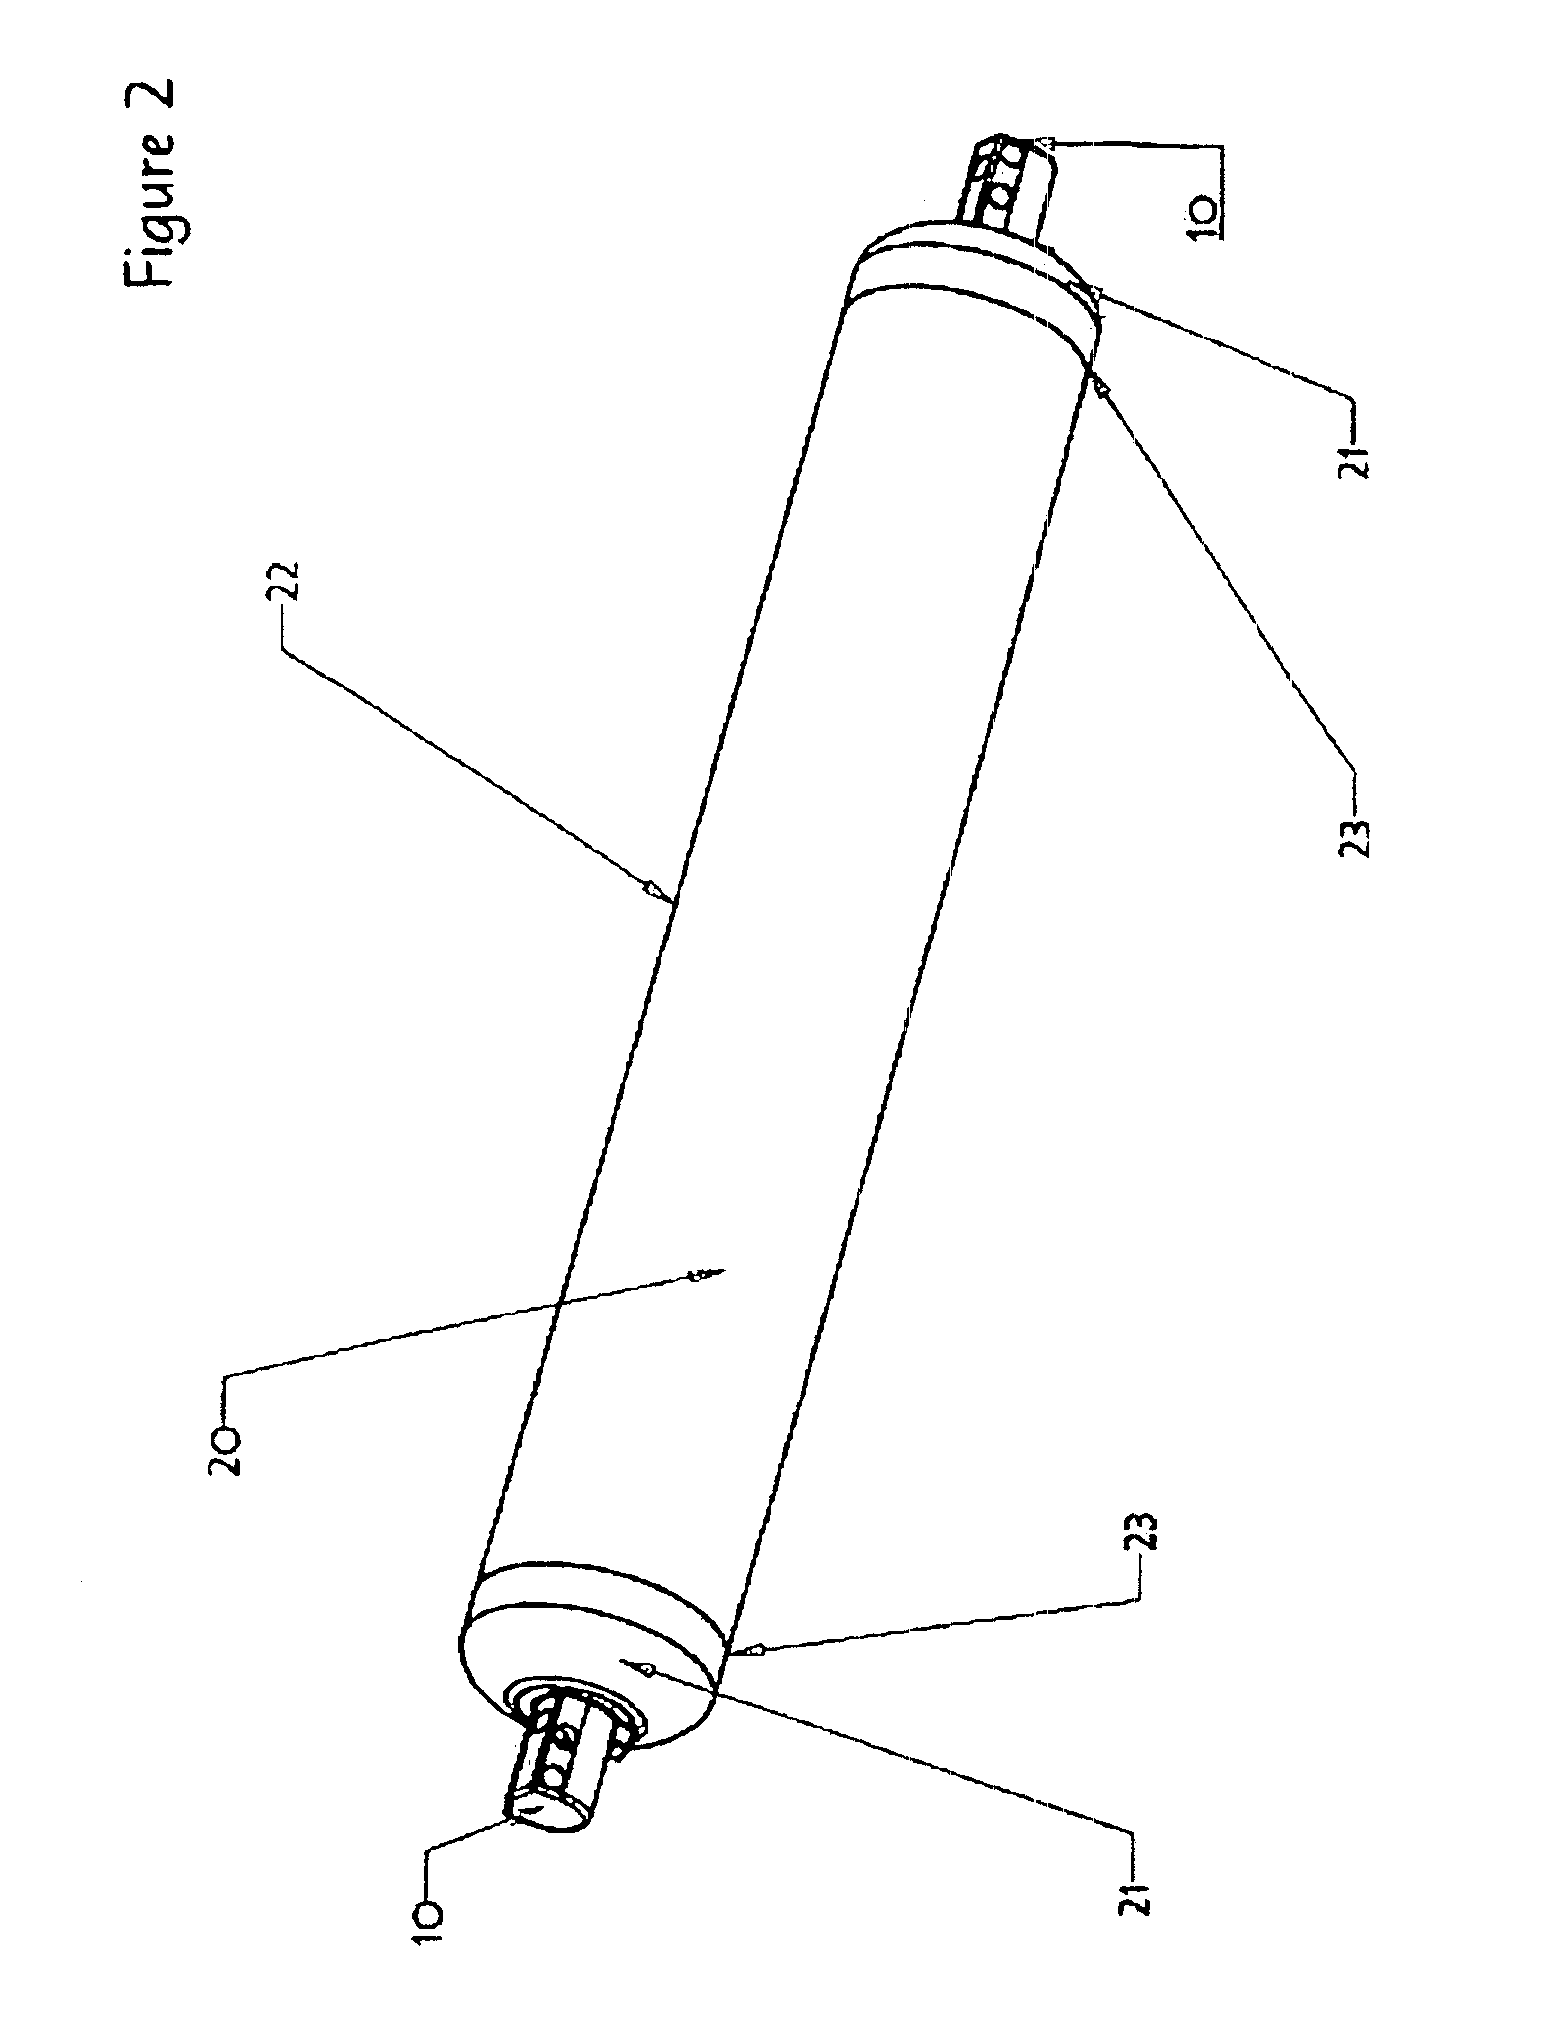 Method and apparatus for pressure swing adsorption